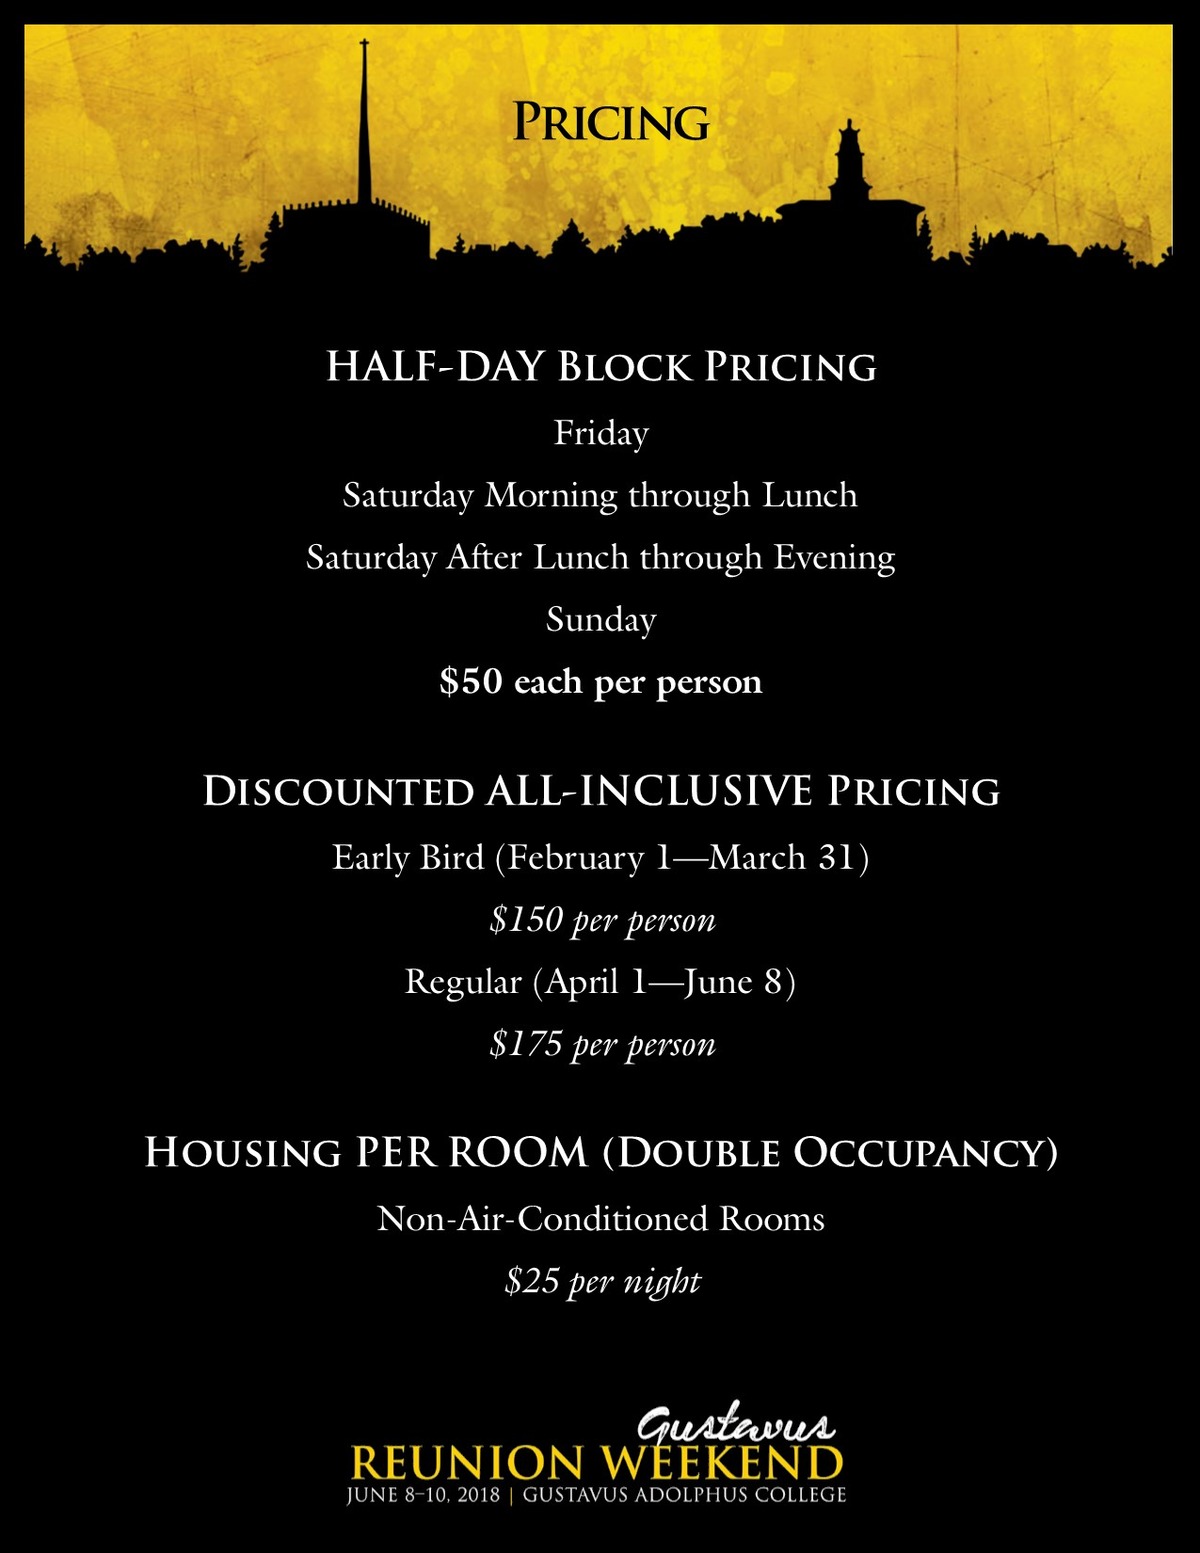 Class specific Reunion Weekend pricing information